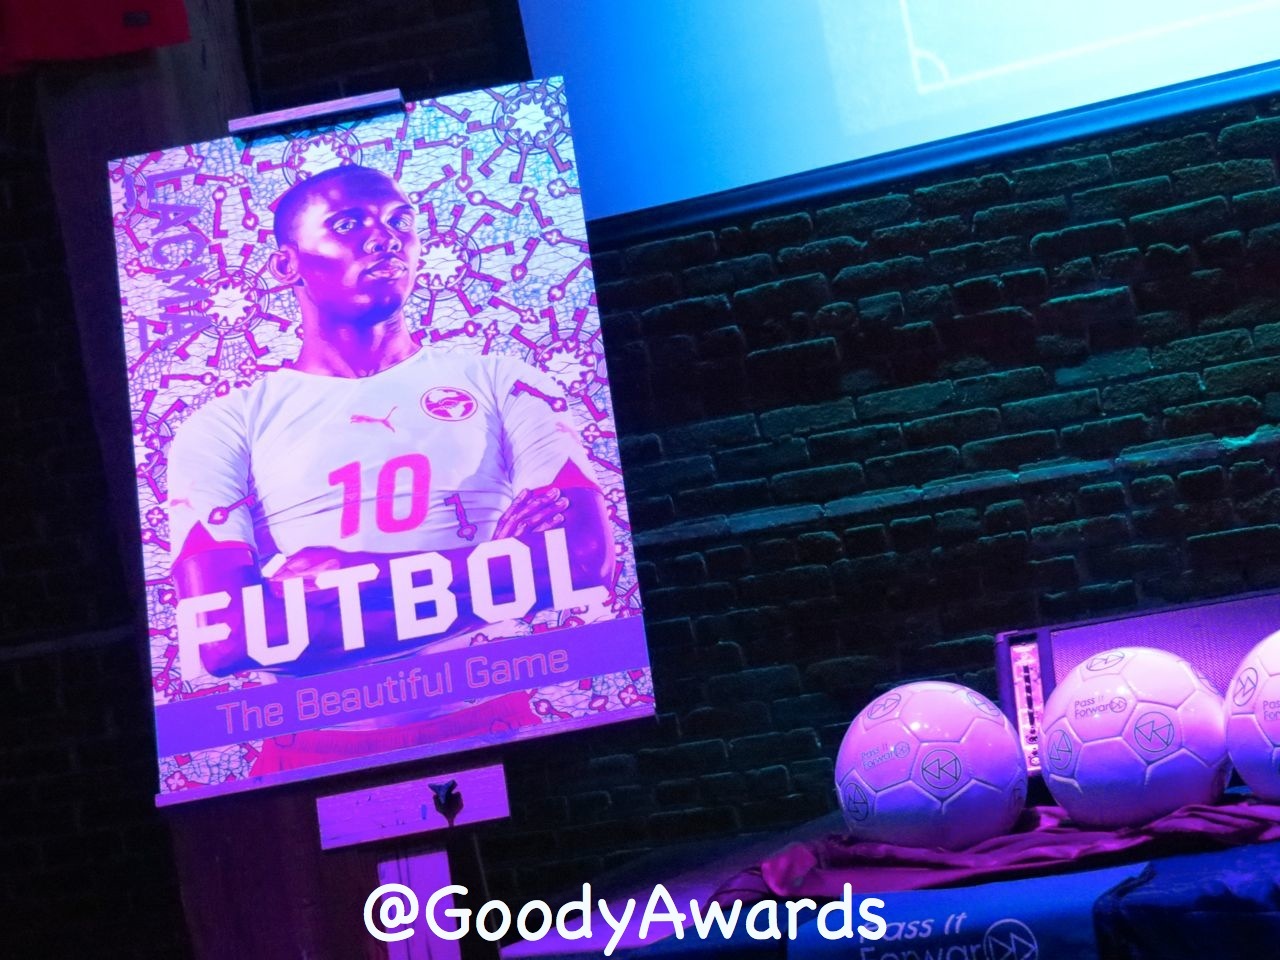 Goody Awards kicks off WorldCup4Good Campaign with Special Awards